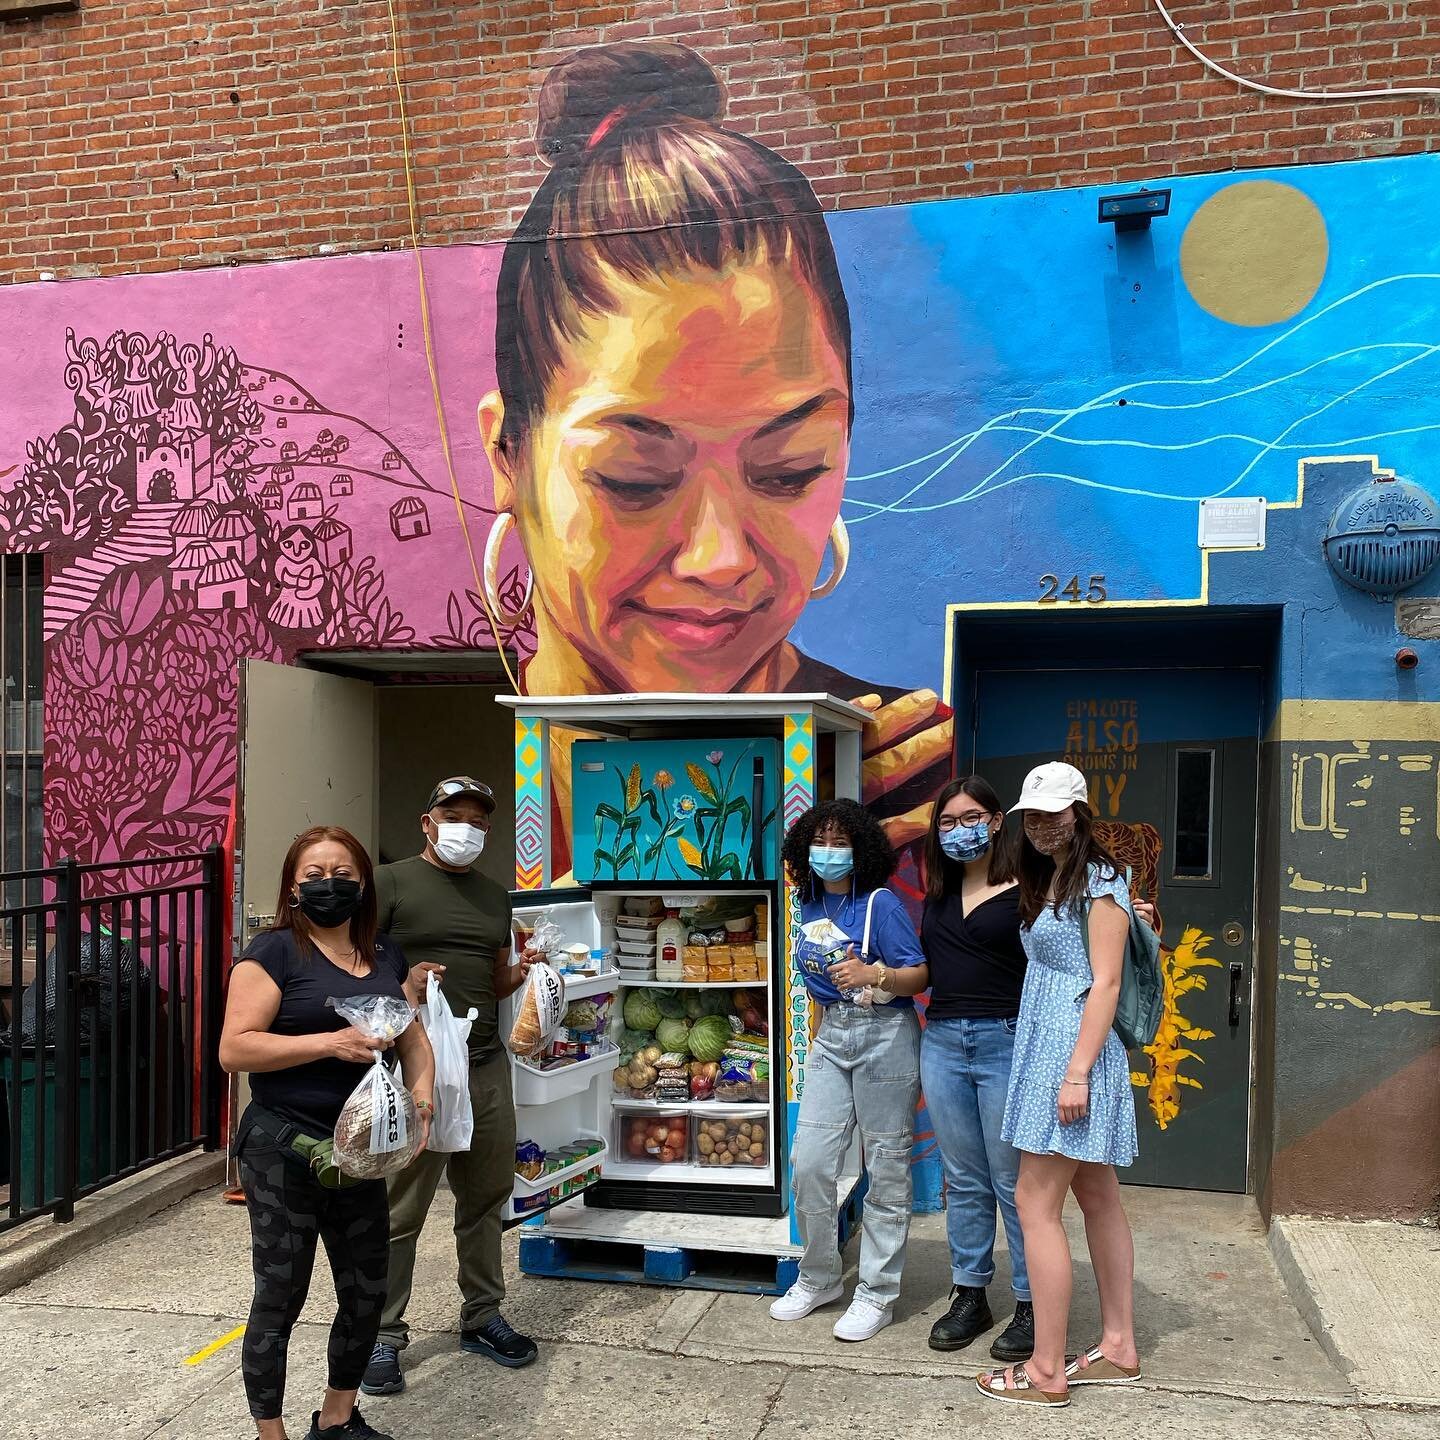 Community distribution at @mixtecaorg 
Check out their beautiful mural! 

#community #communitysupport #communitylove #communityactivism #communityactivist #activism #friendsandfridges